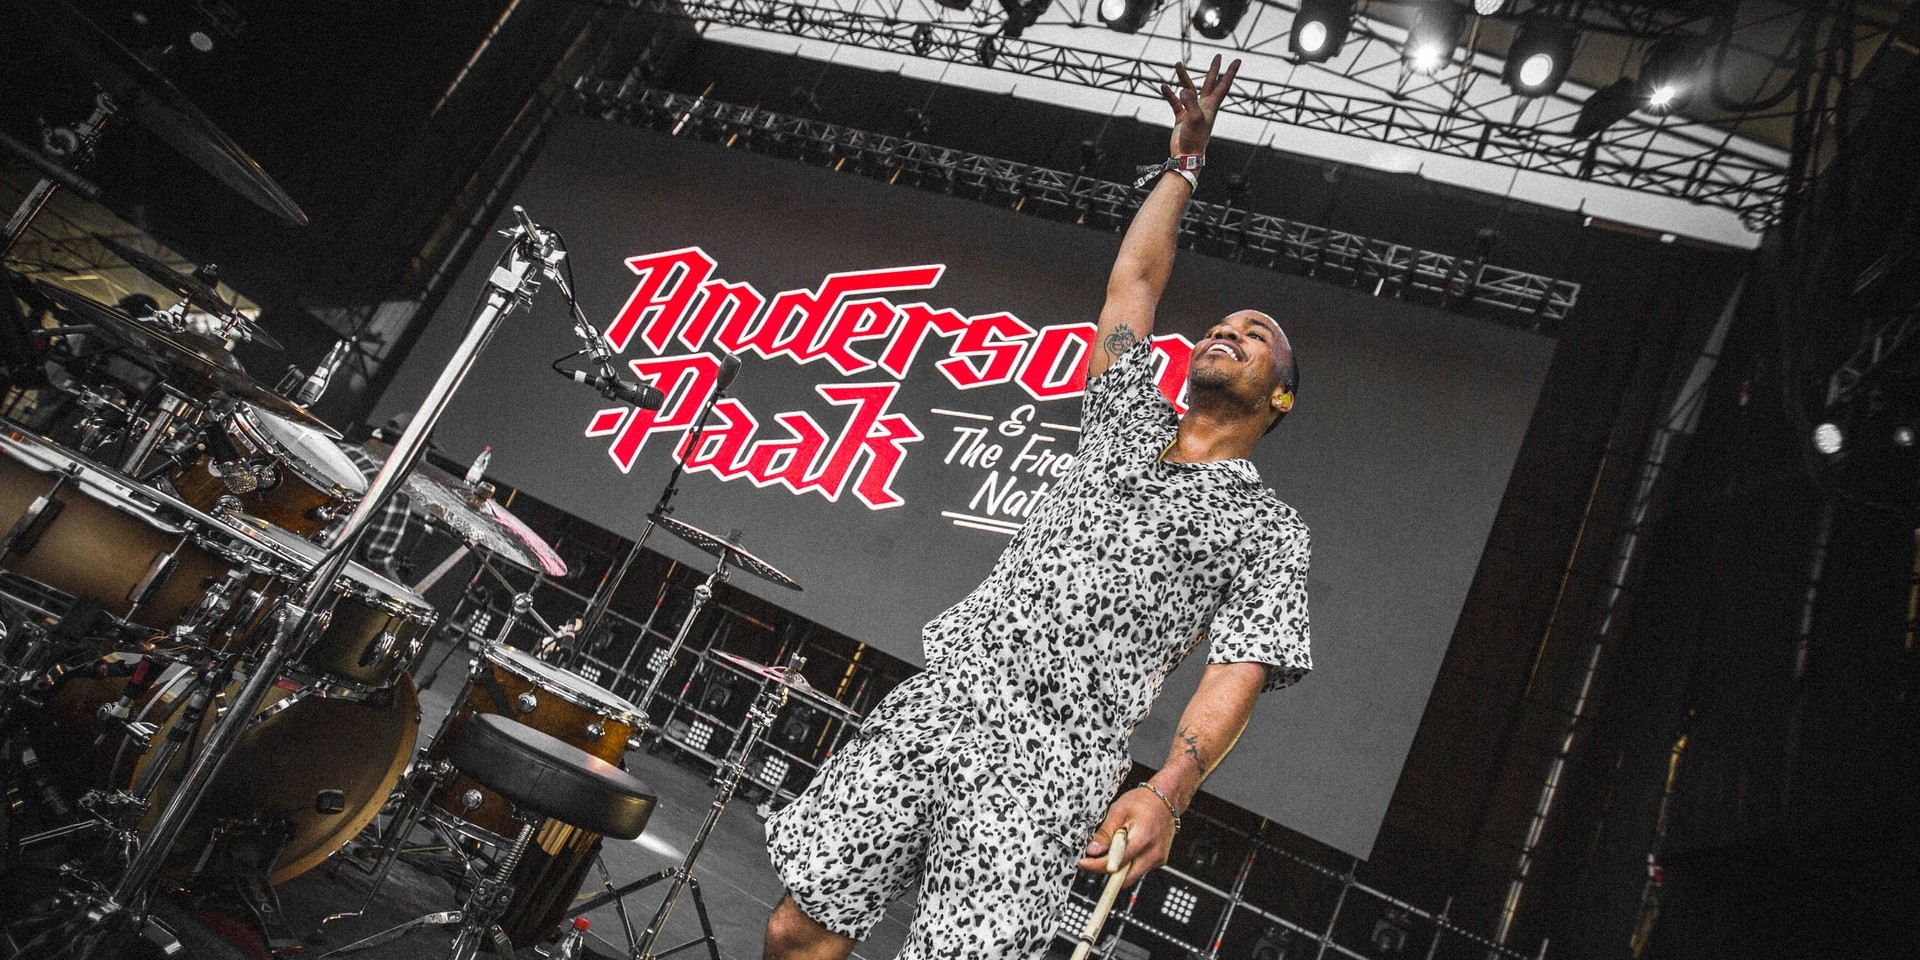 Anderson .Paak and the Free Nationals to perform in Kuala Lumpur